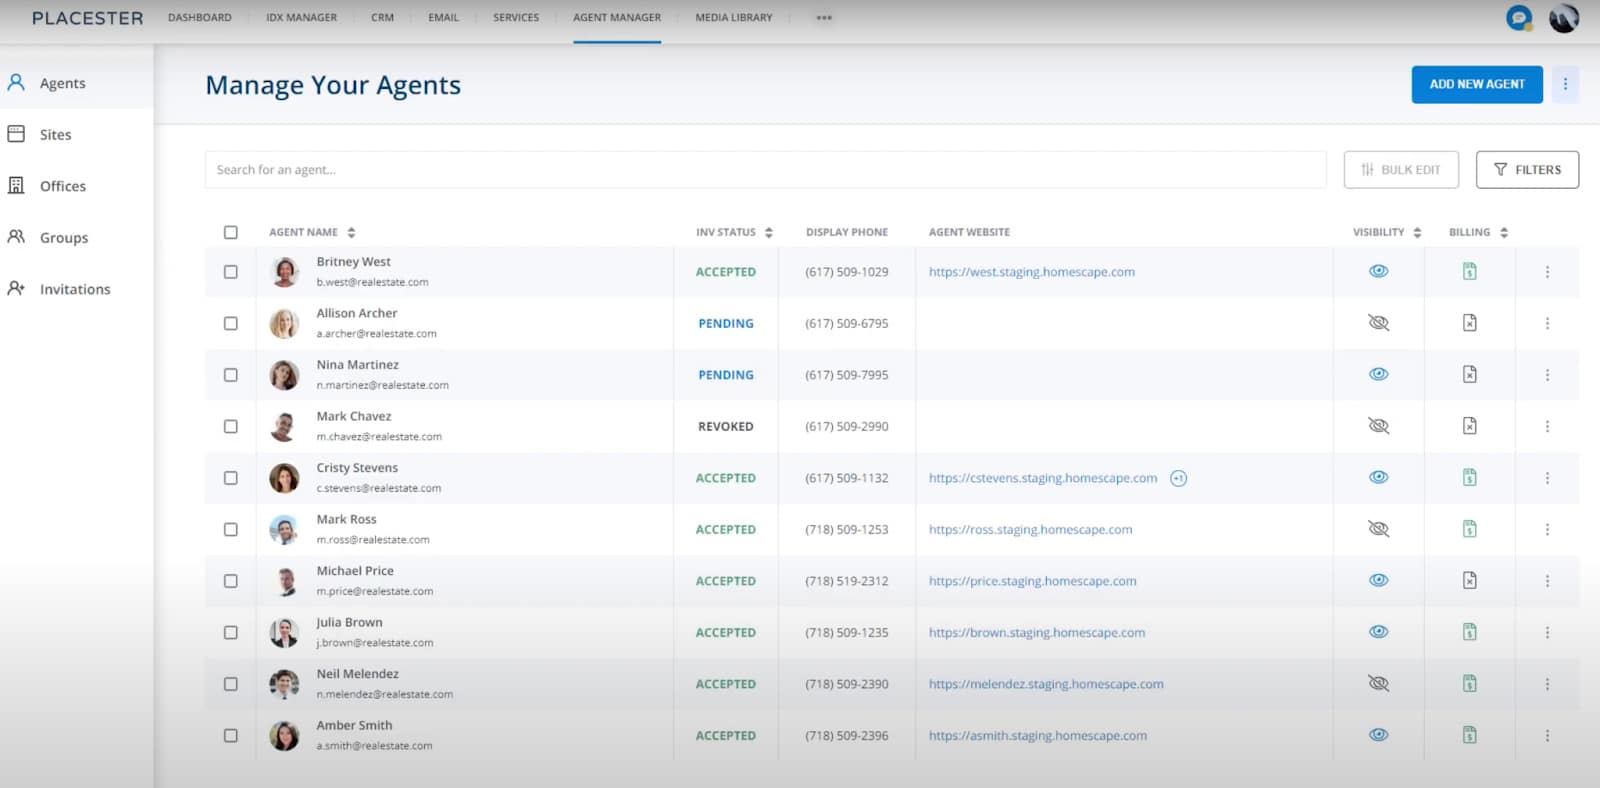 Screenshot of Placester's agent manager dashboard.